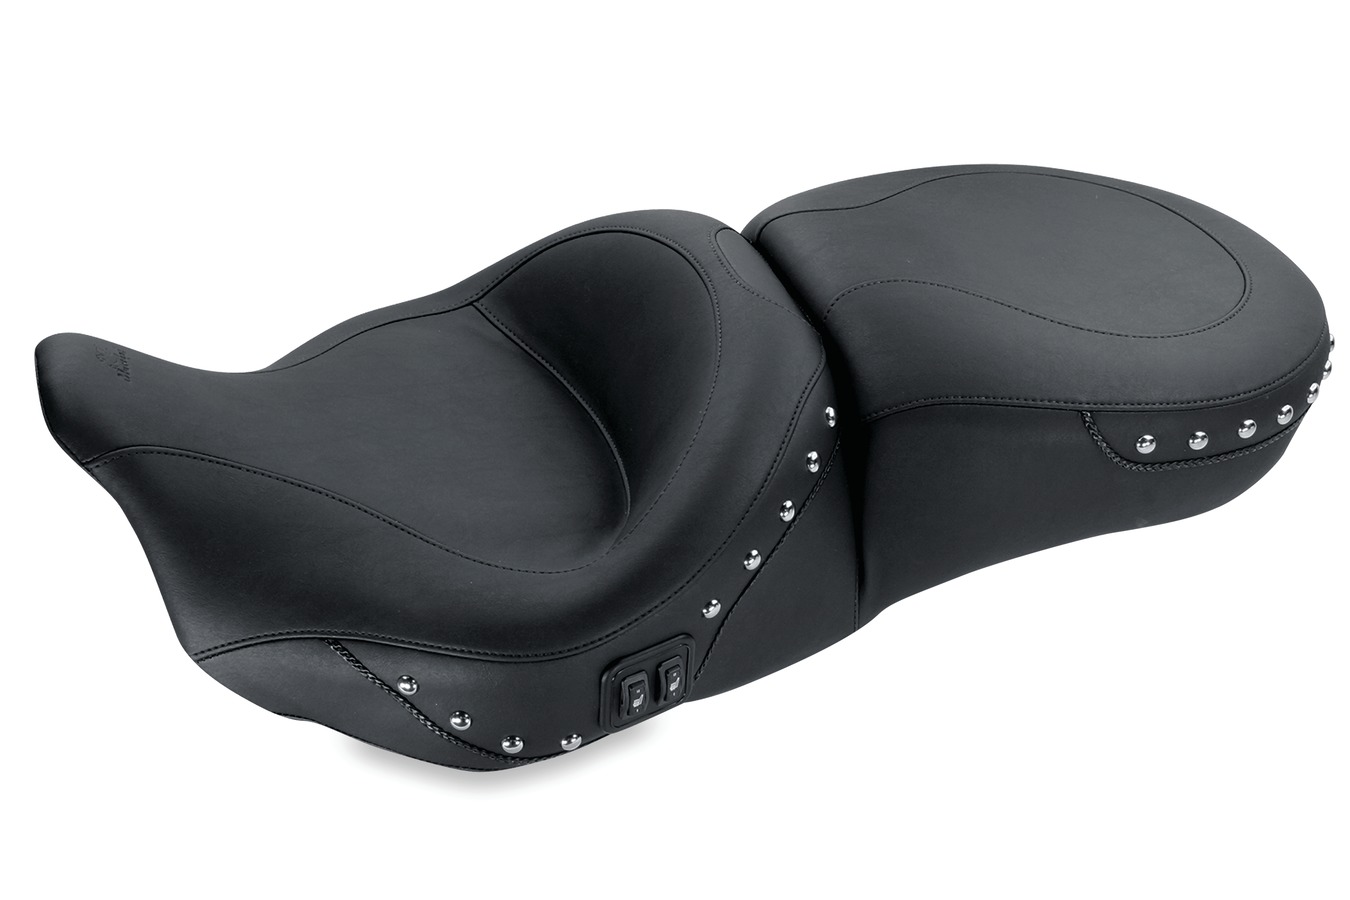 Standard Touring One-Piece Seat with Heat for Harley-Davidson Electra Glide Standard, Road Glide, Road King & Street Glide 2008-